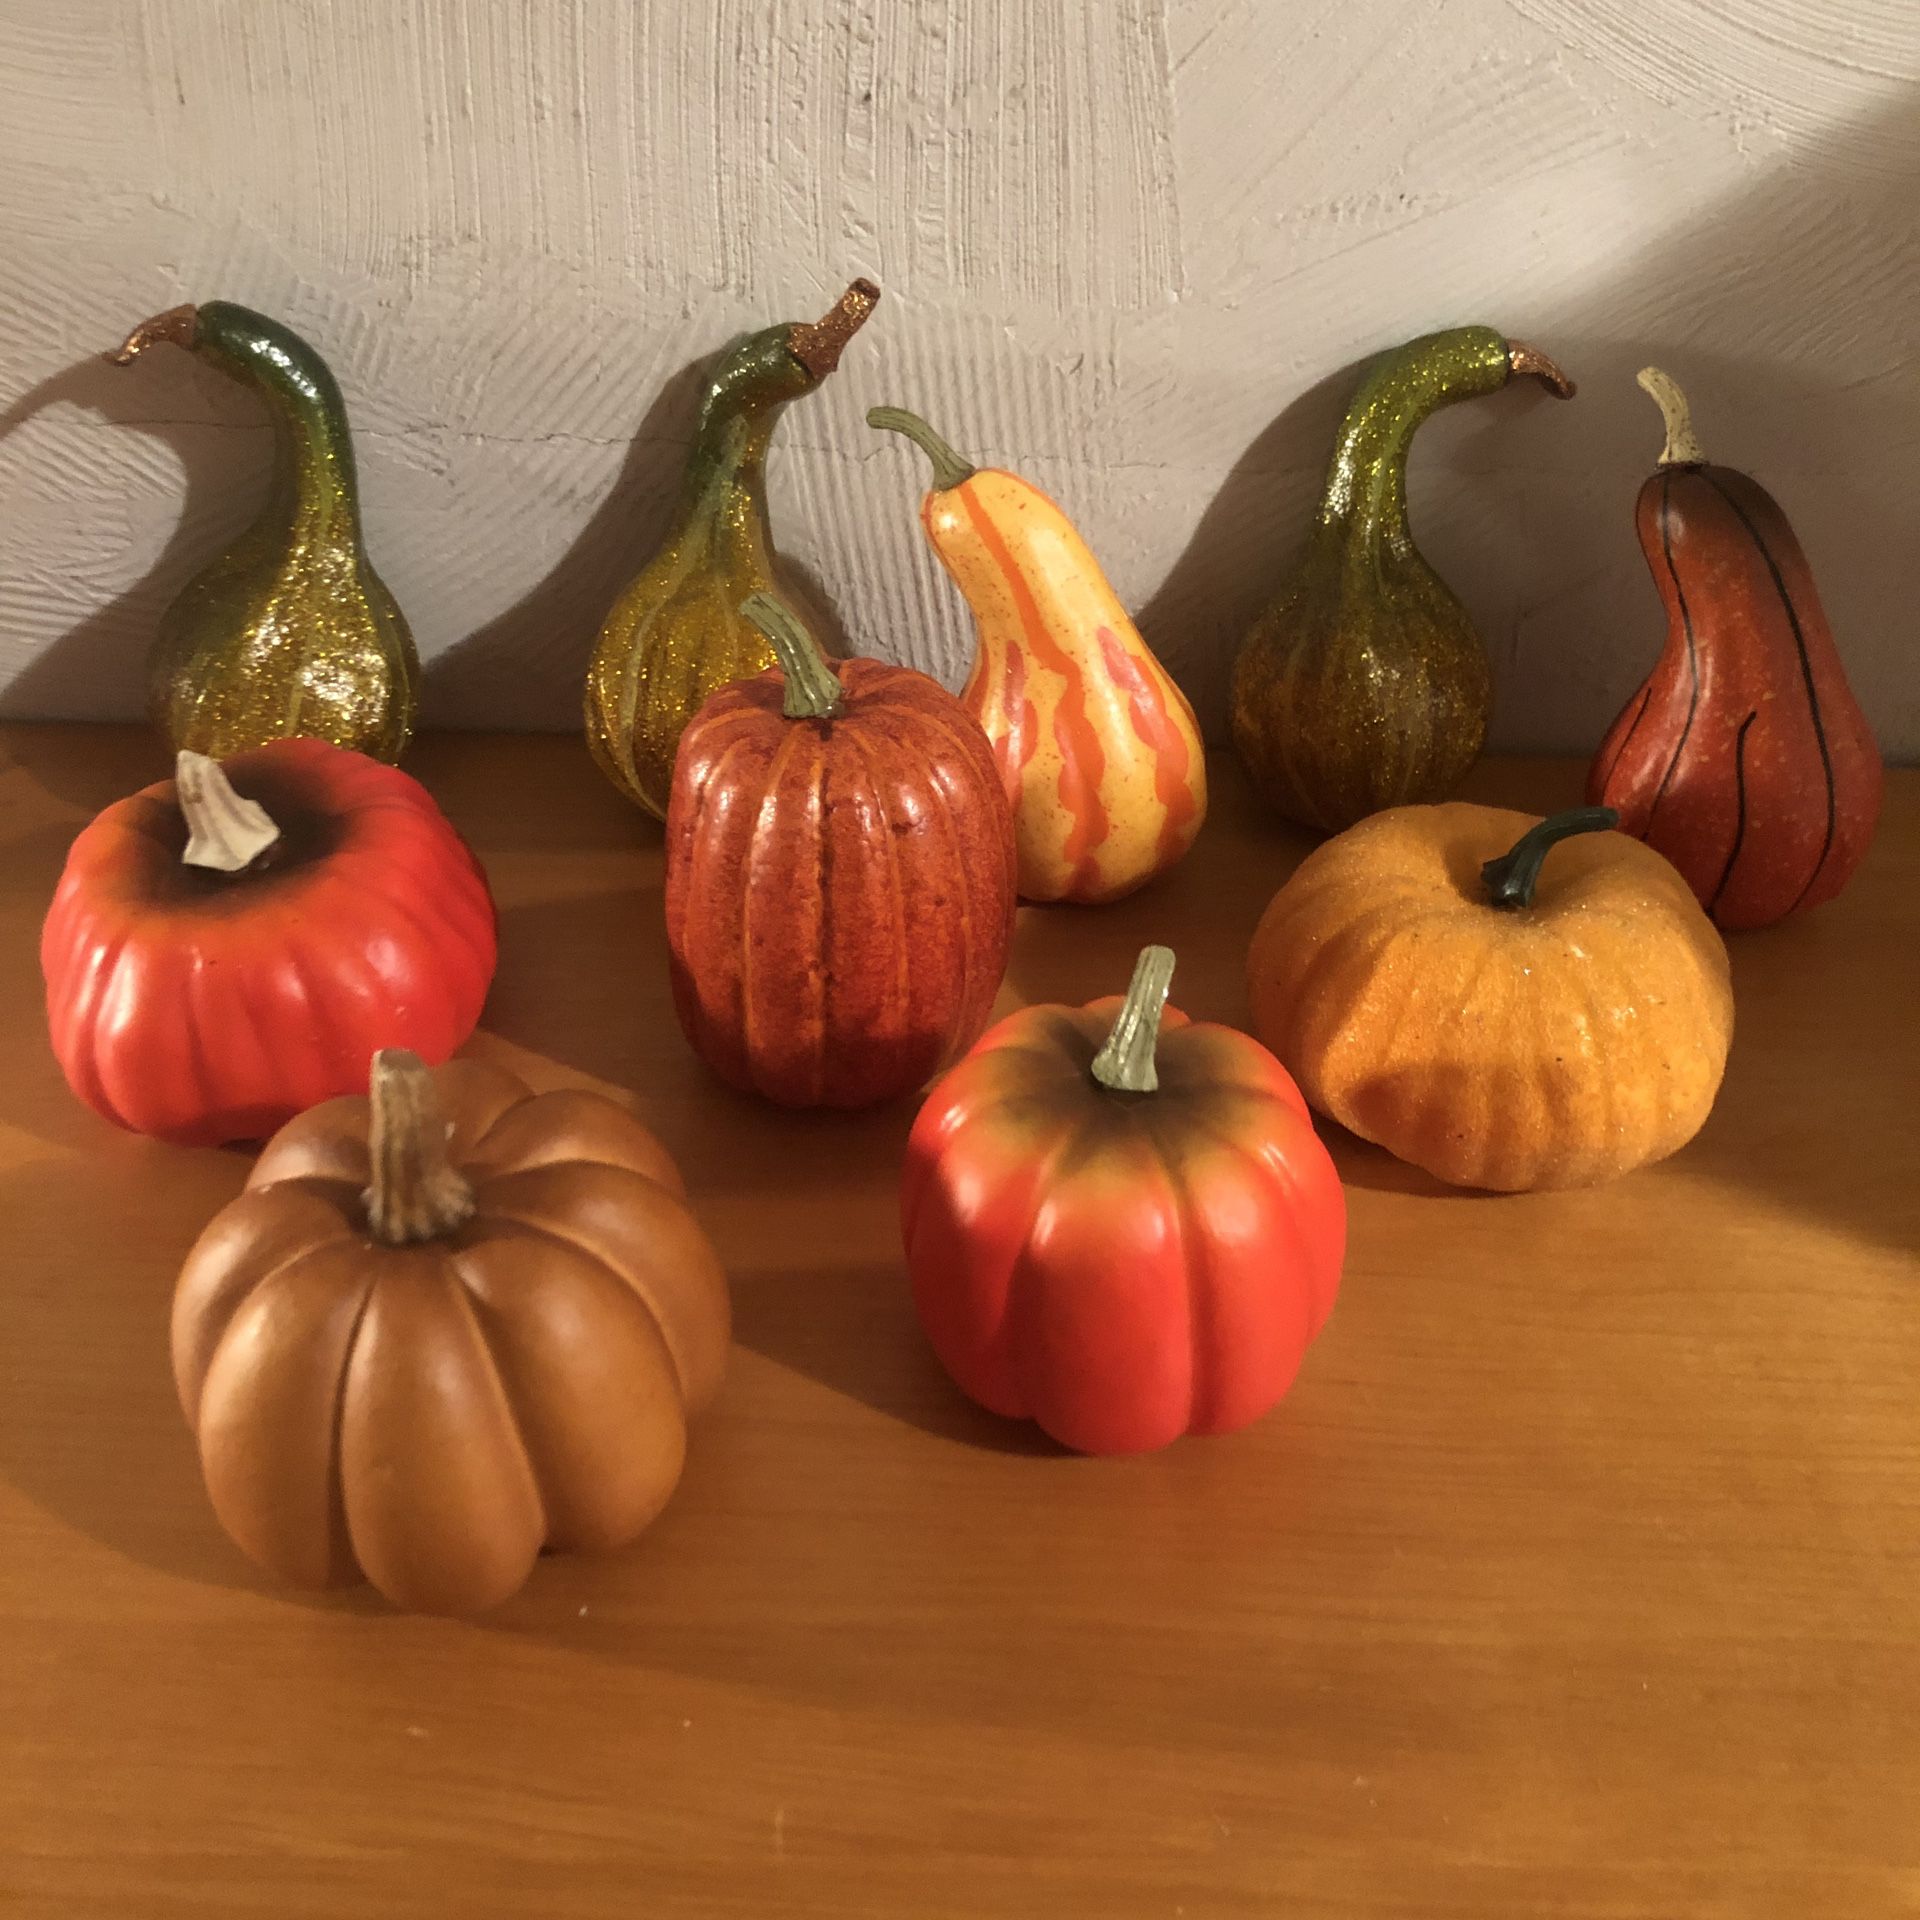 Fall/ harvest decorations. 5 hard plastic like gourds and 5 pumpkins. Some have glitter made on them and all came from Michael’s so great for crafts